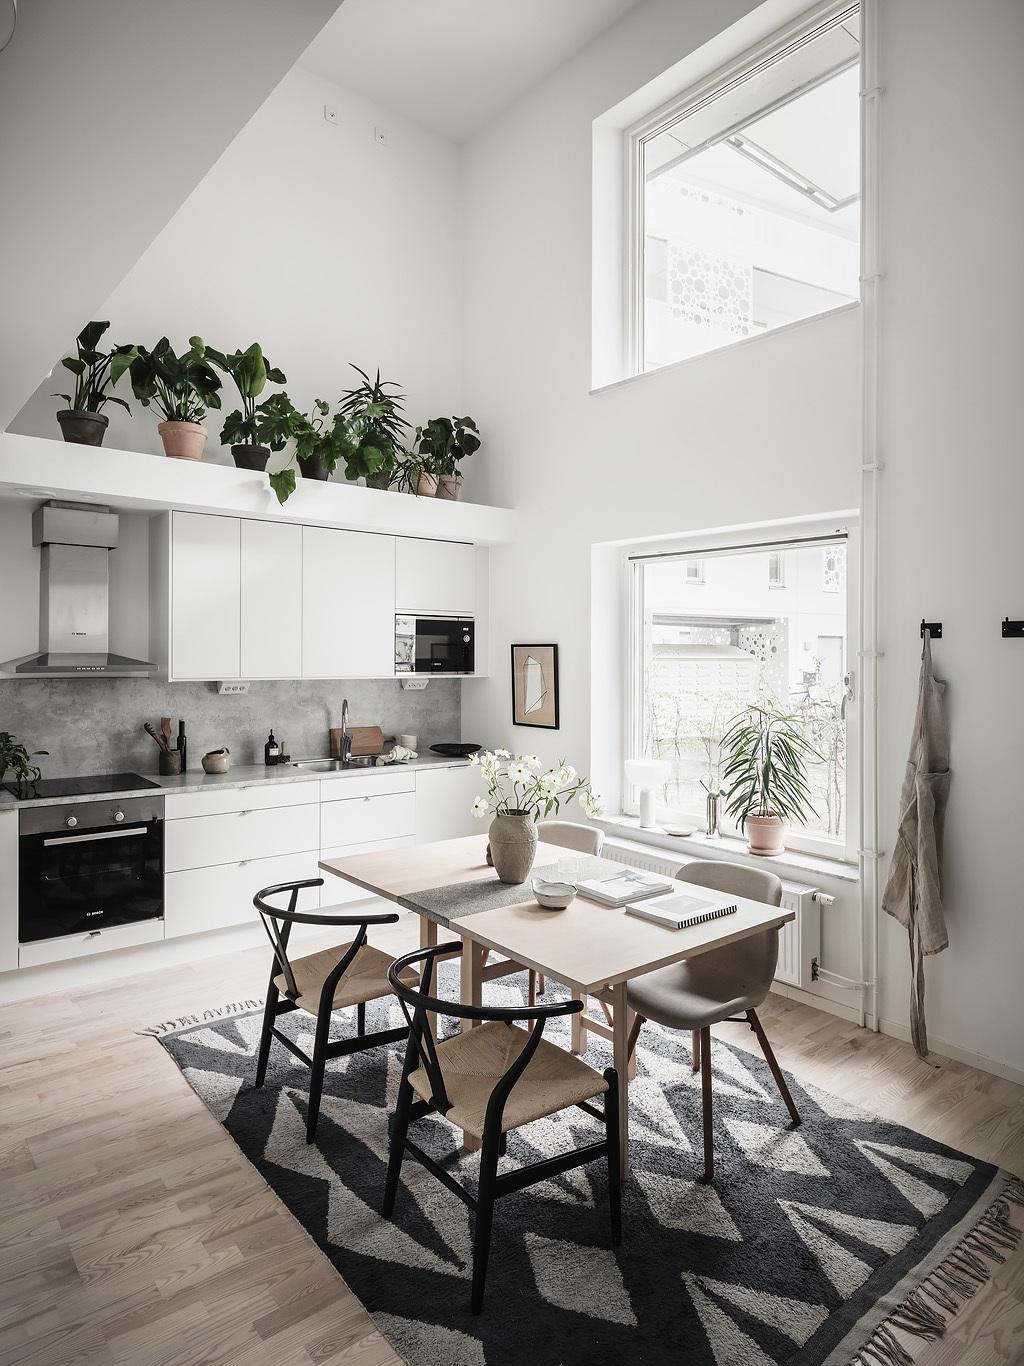 Steal Some Decor Ideas from this Small Duplex Apartment in Sweden